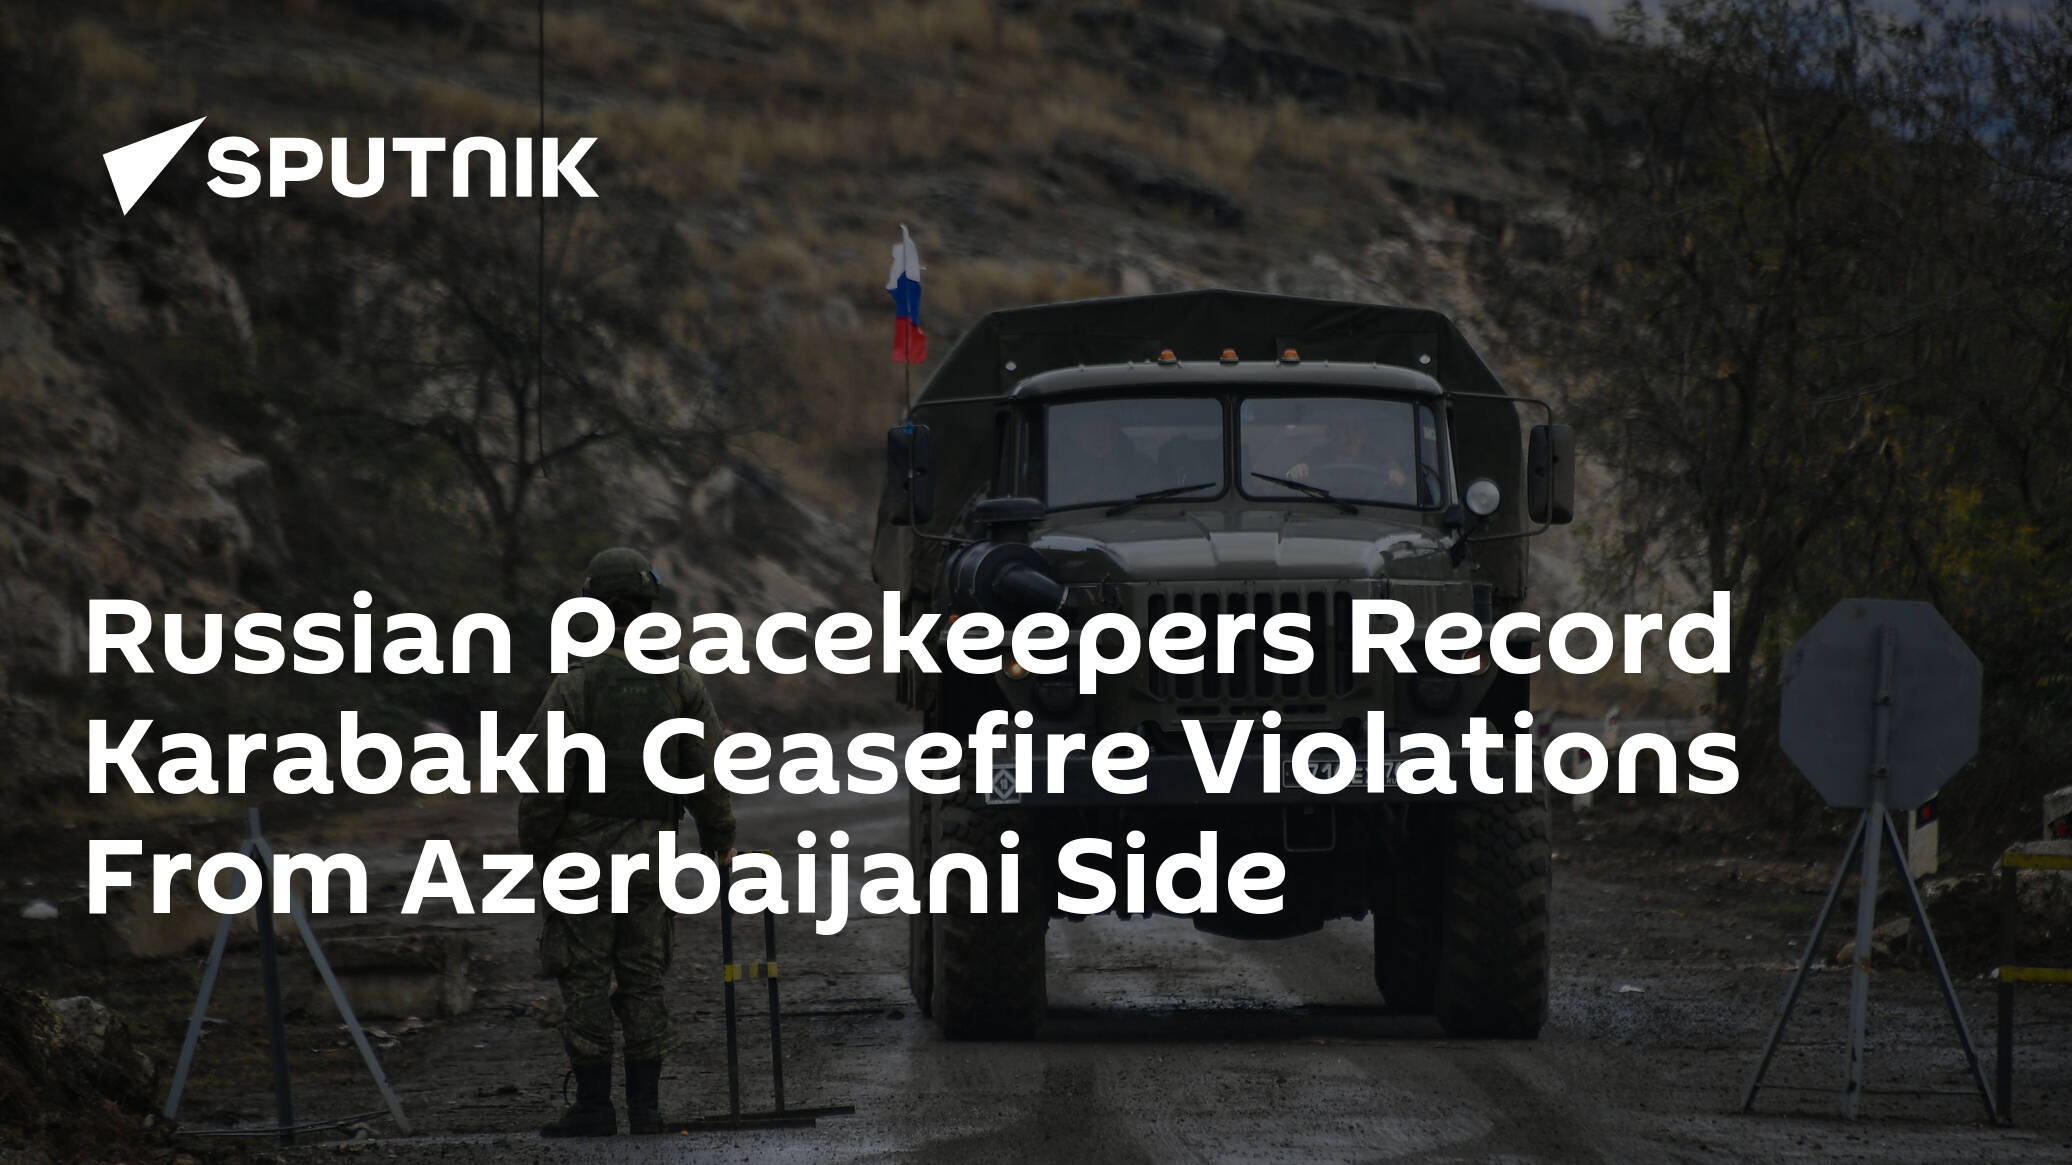 Russian Peacekeepers Record Karabakh Ceasefire Violations From Azerbaijani Side